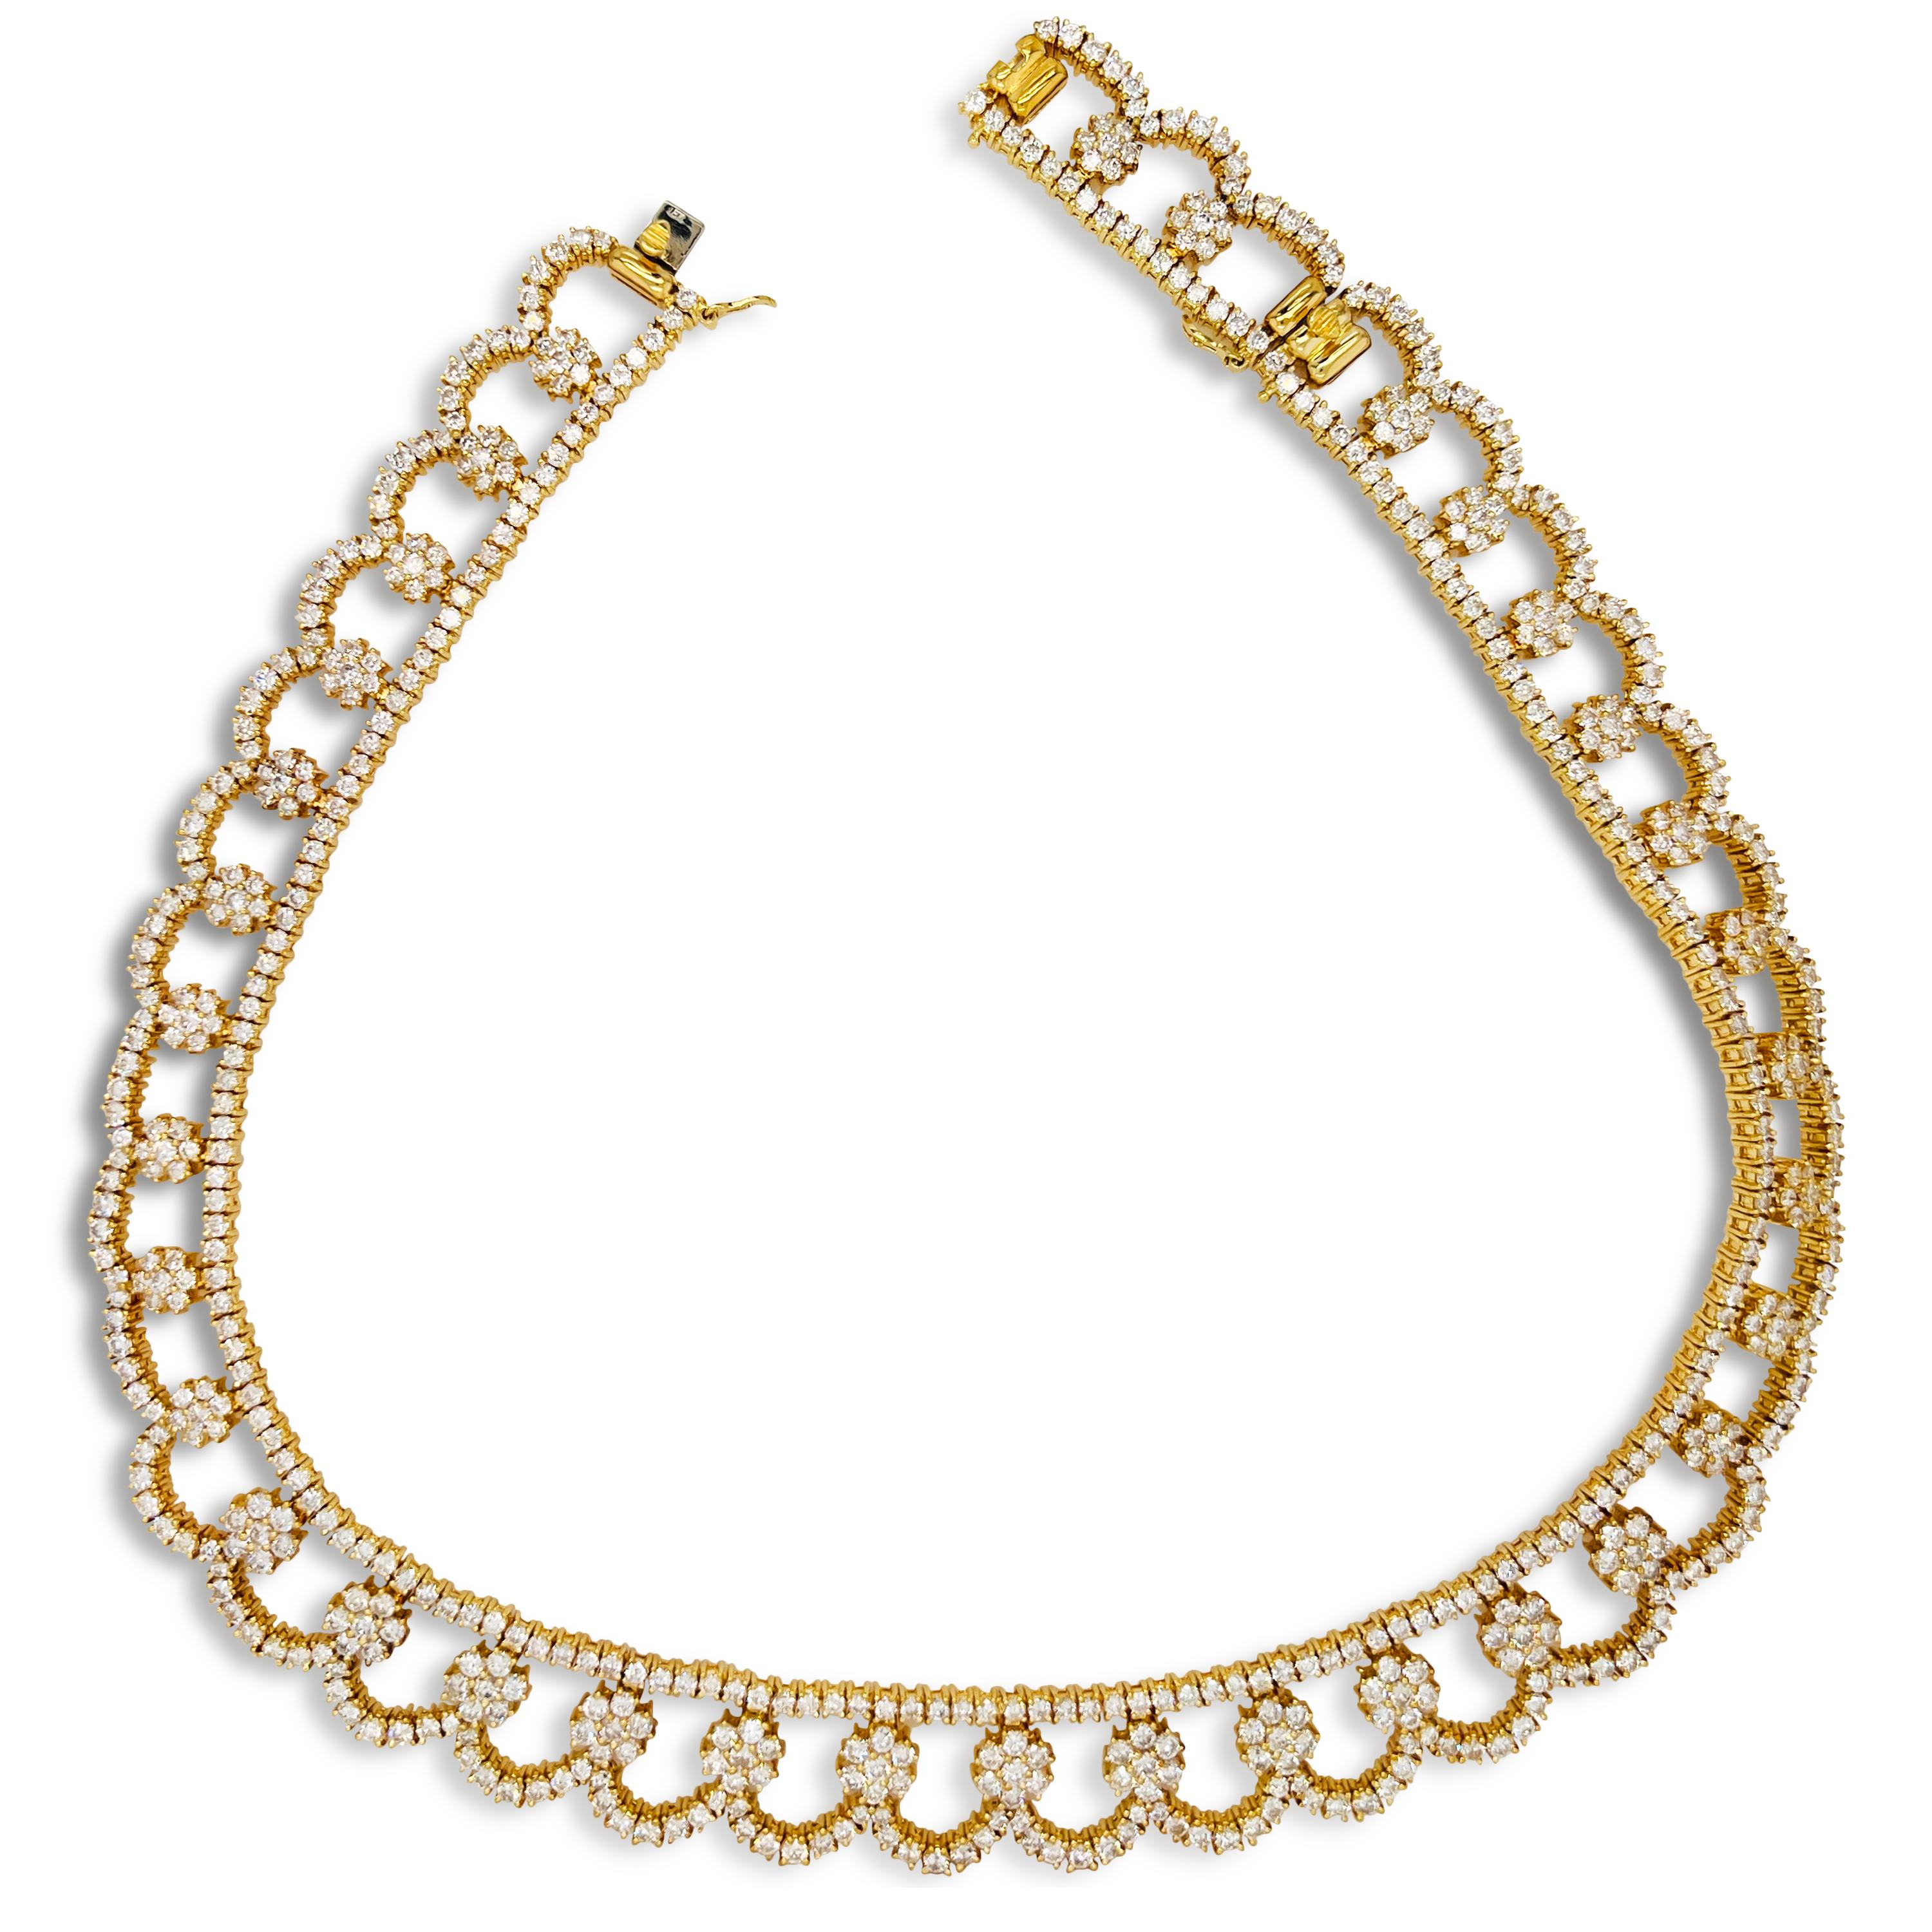 18 Karat Yellow Gold Diamond Clusters Choker Necklace In Excellent Condition For Sale In Boca Raton, FL